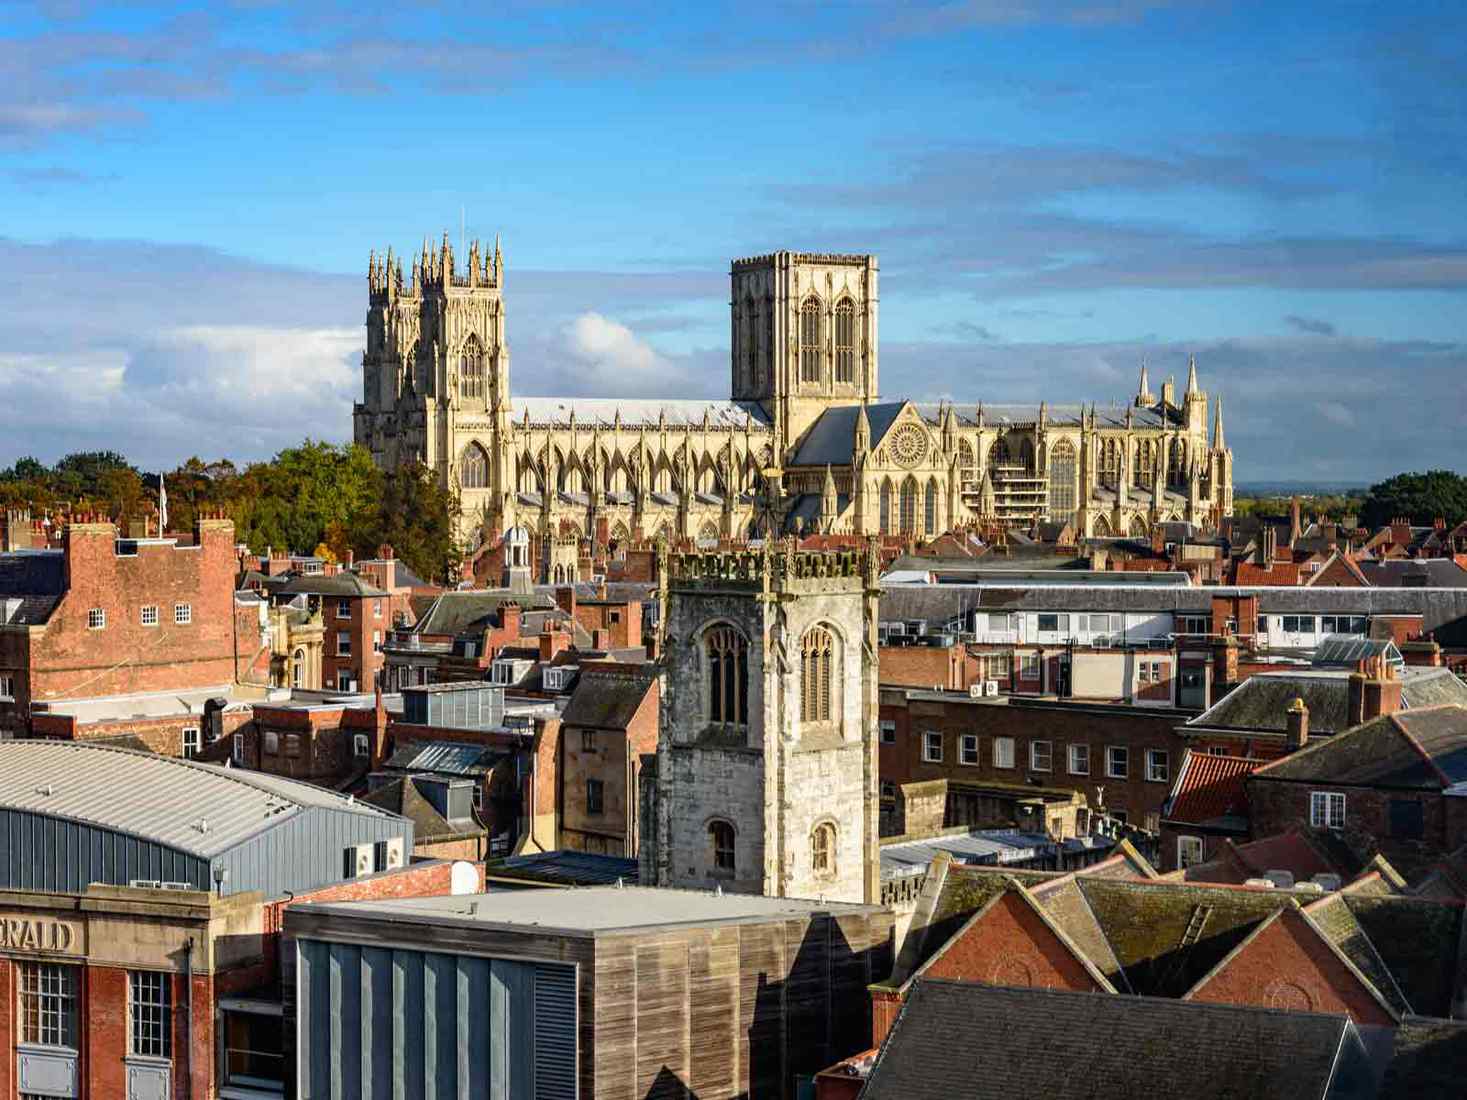 View of York Minster over the city skyline. 